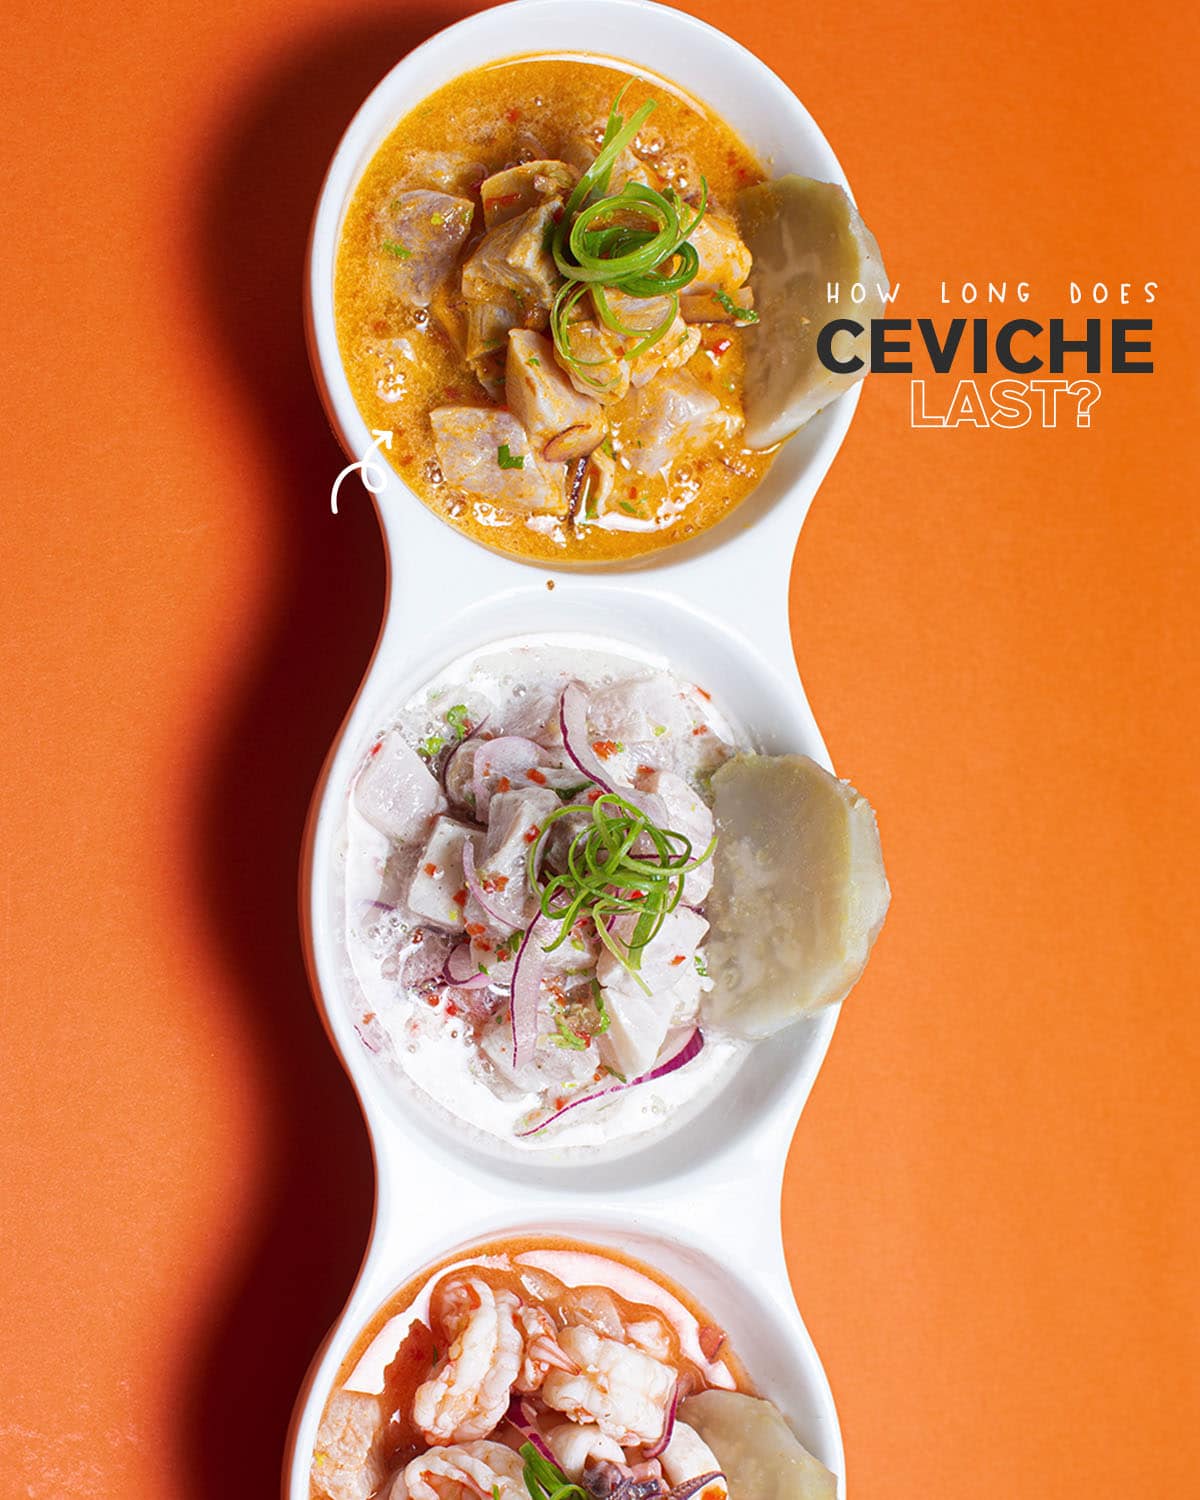 Ceviche is a dish that keeps for a few days. For maximum freshness, consume it within two hours after preparation.